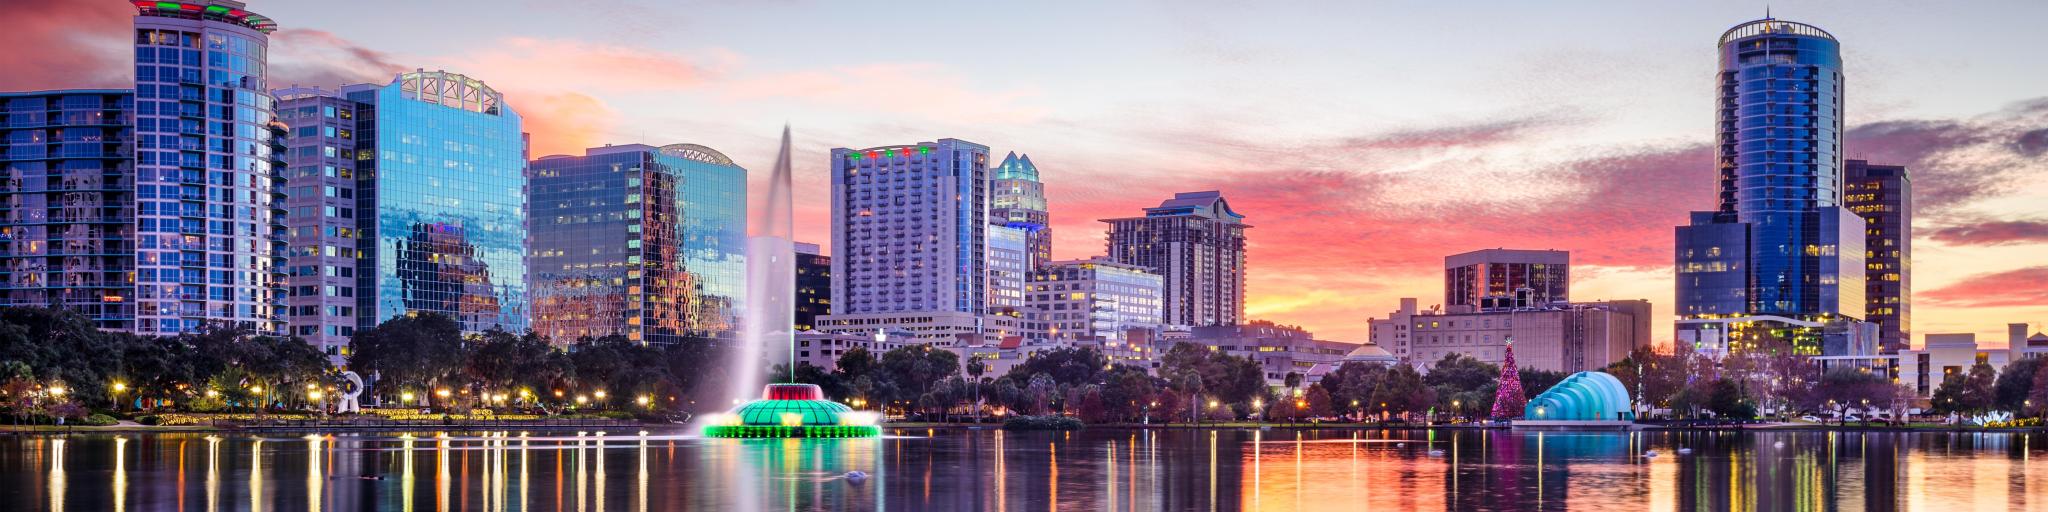 Orlando, Florida with Eola Lake in the foreground and the city buildings reflecting in the background at sunset.